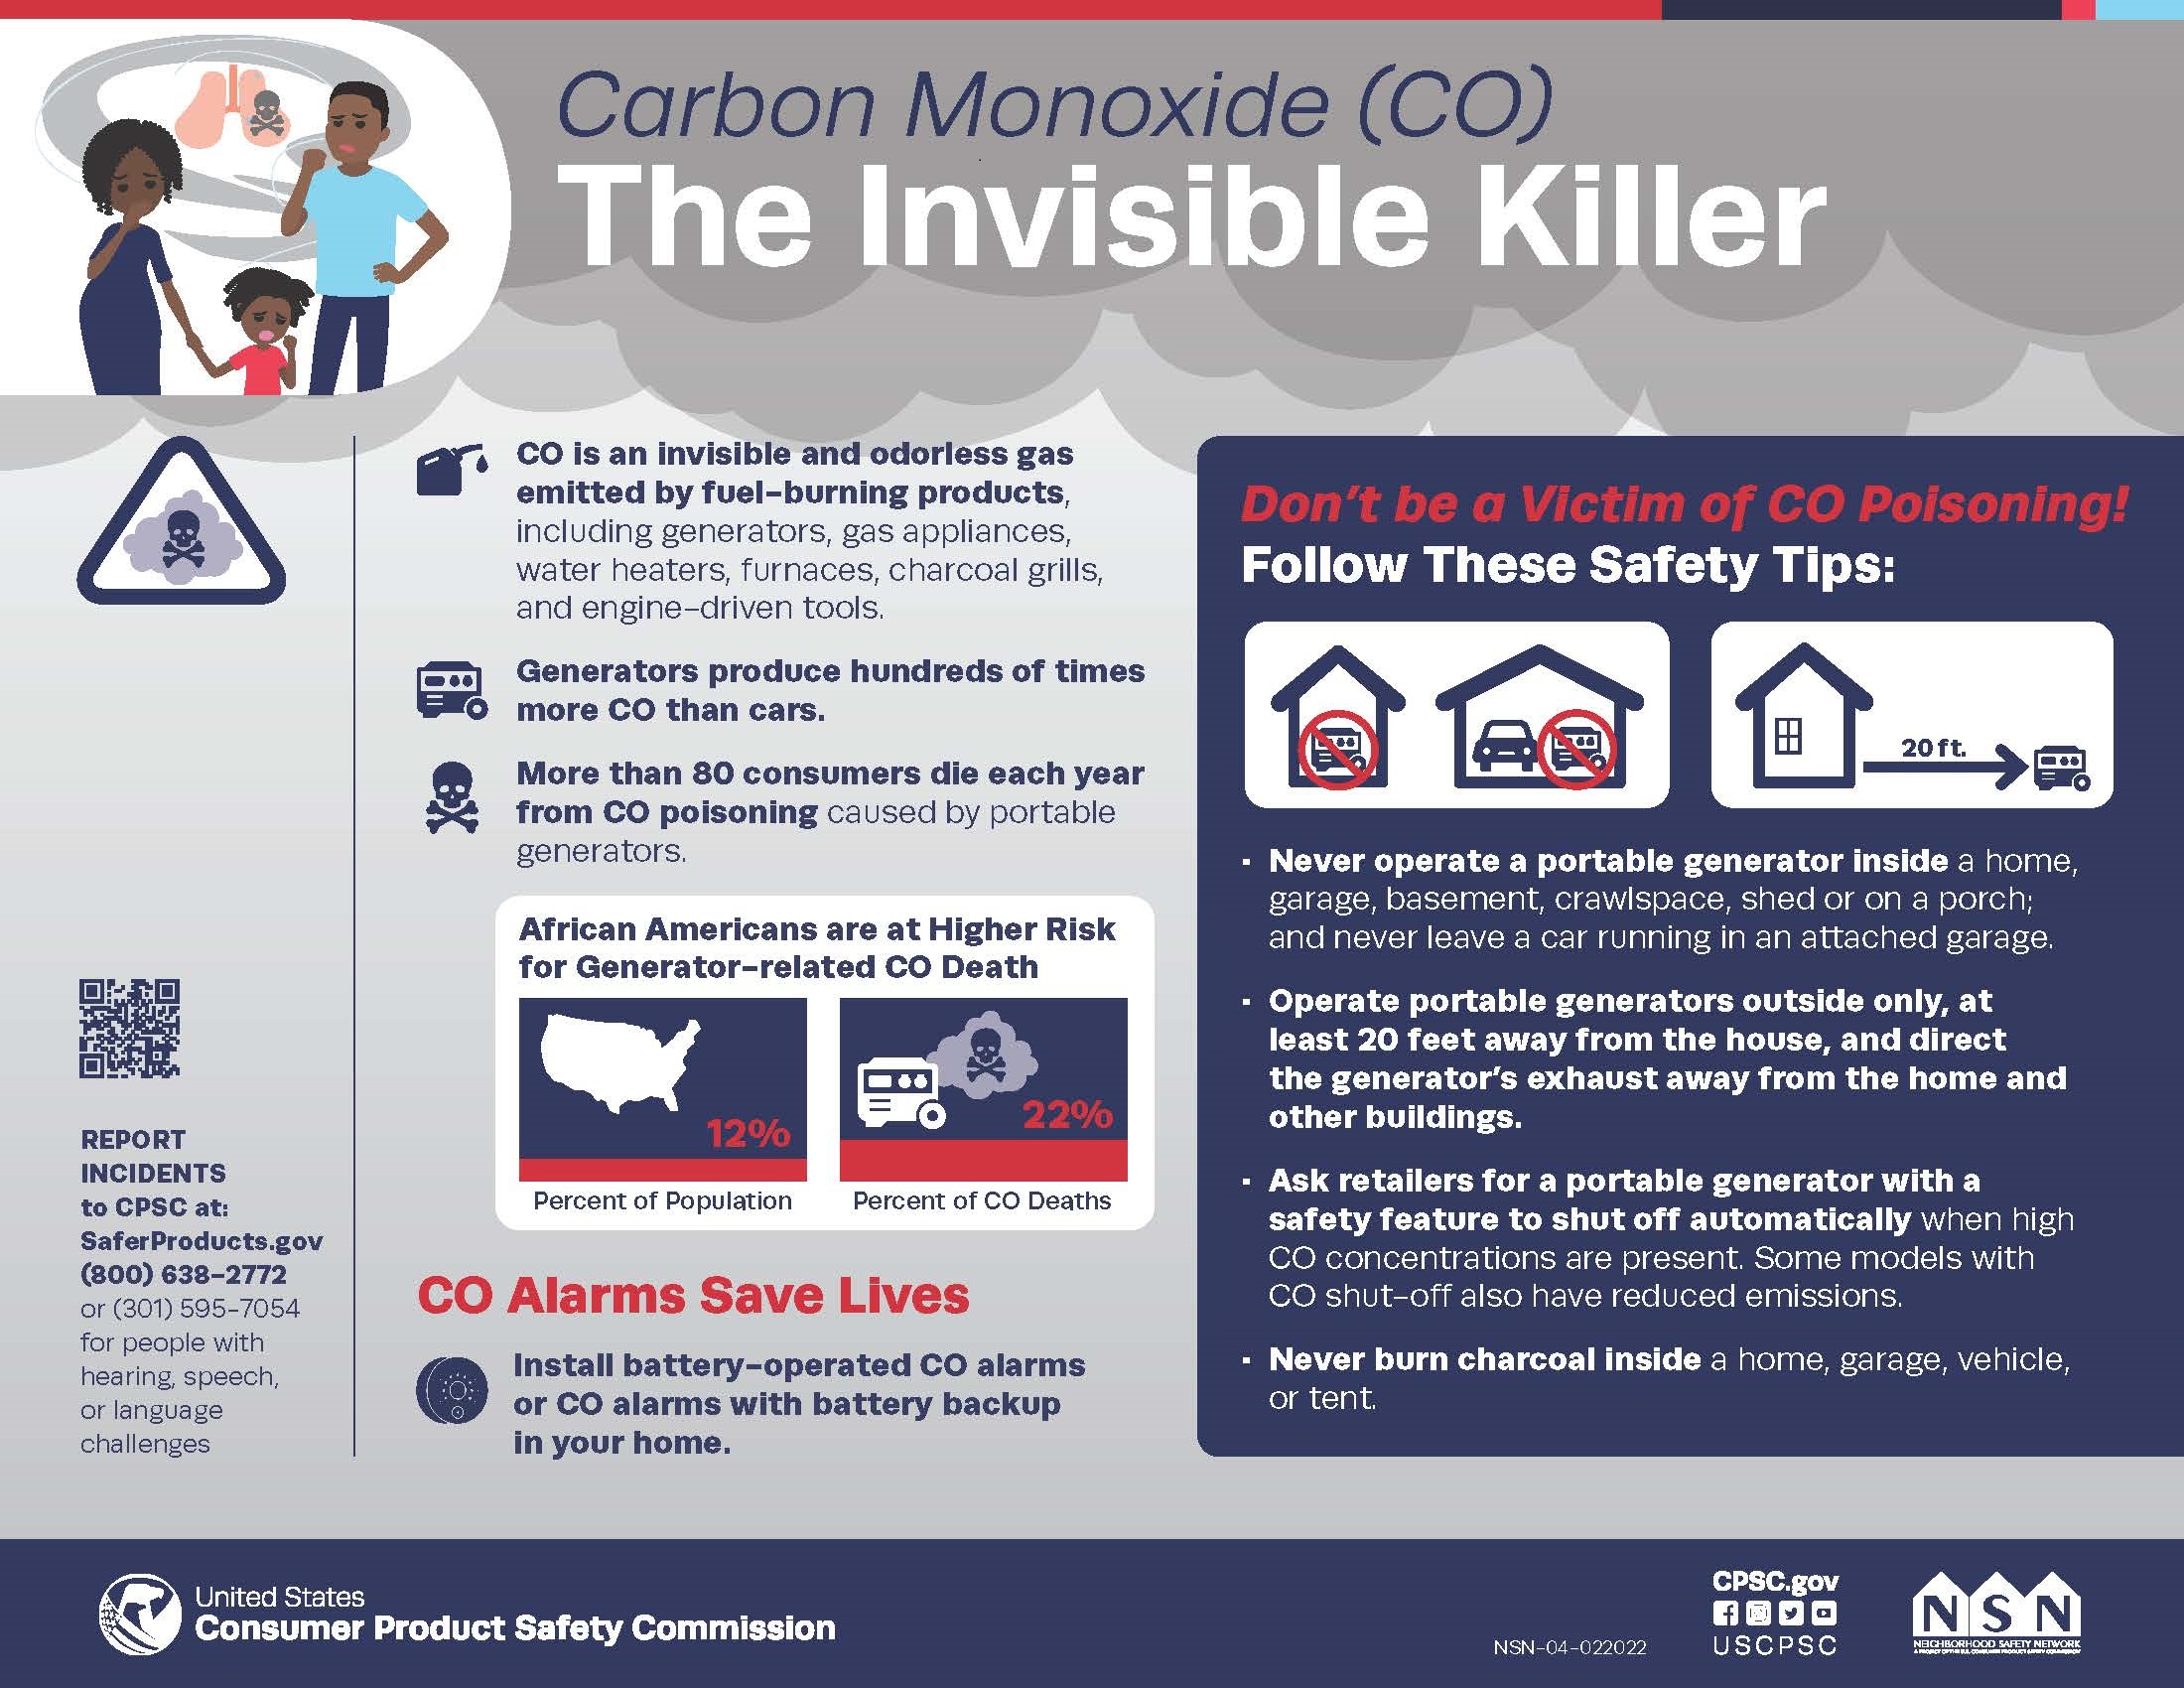 Don’t be a Victim of CO Poisoning! Follow CPSC’s Safety Tips